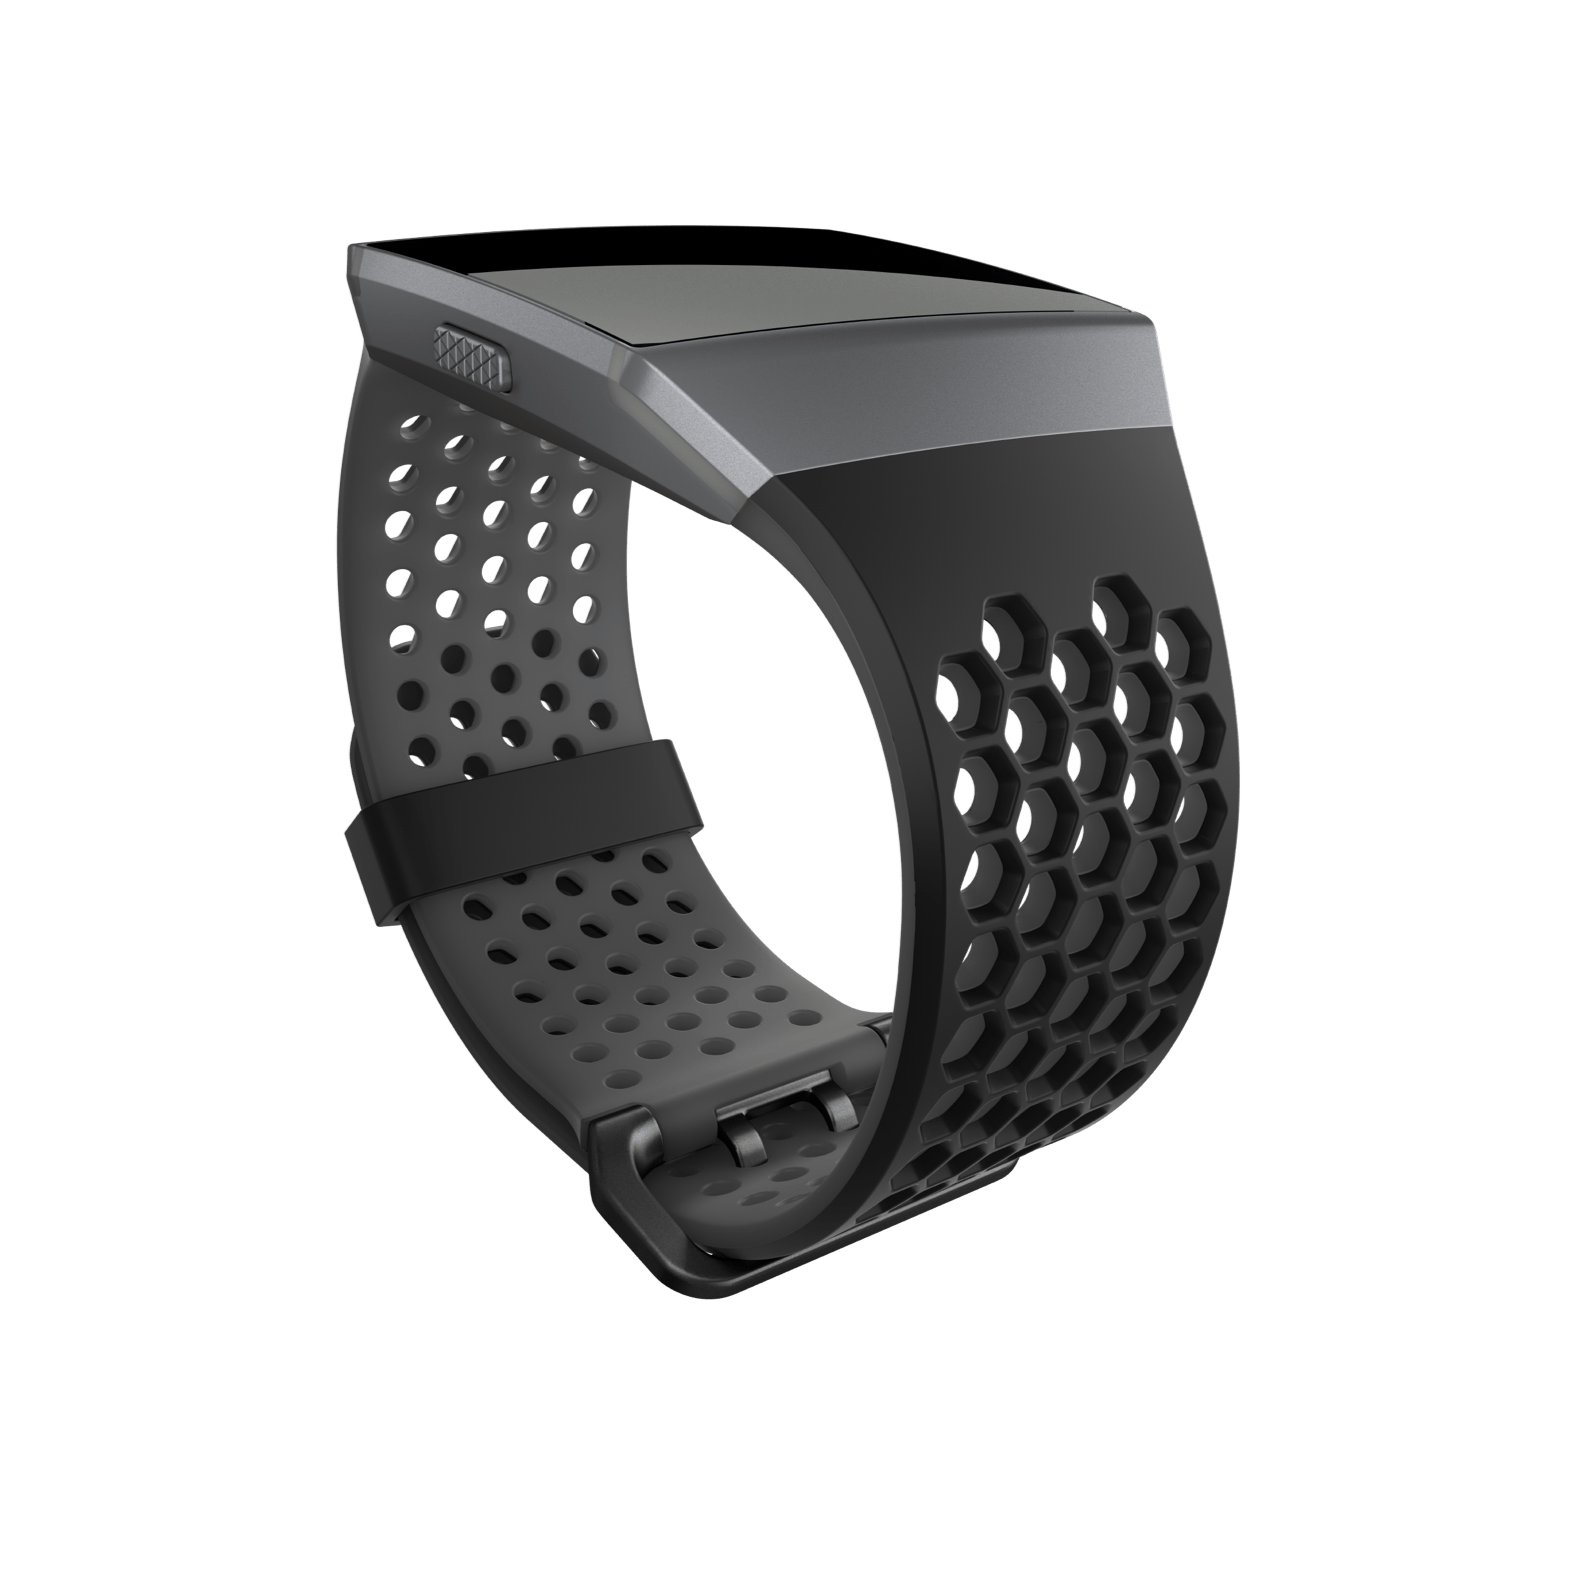 fitbit charcoal band